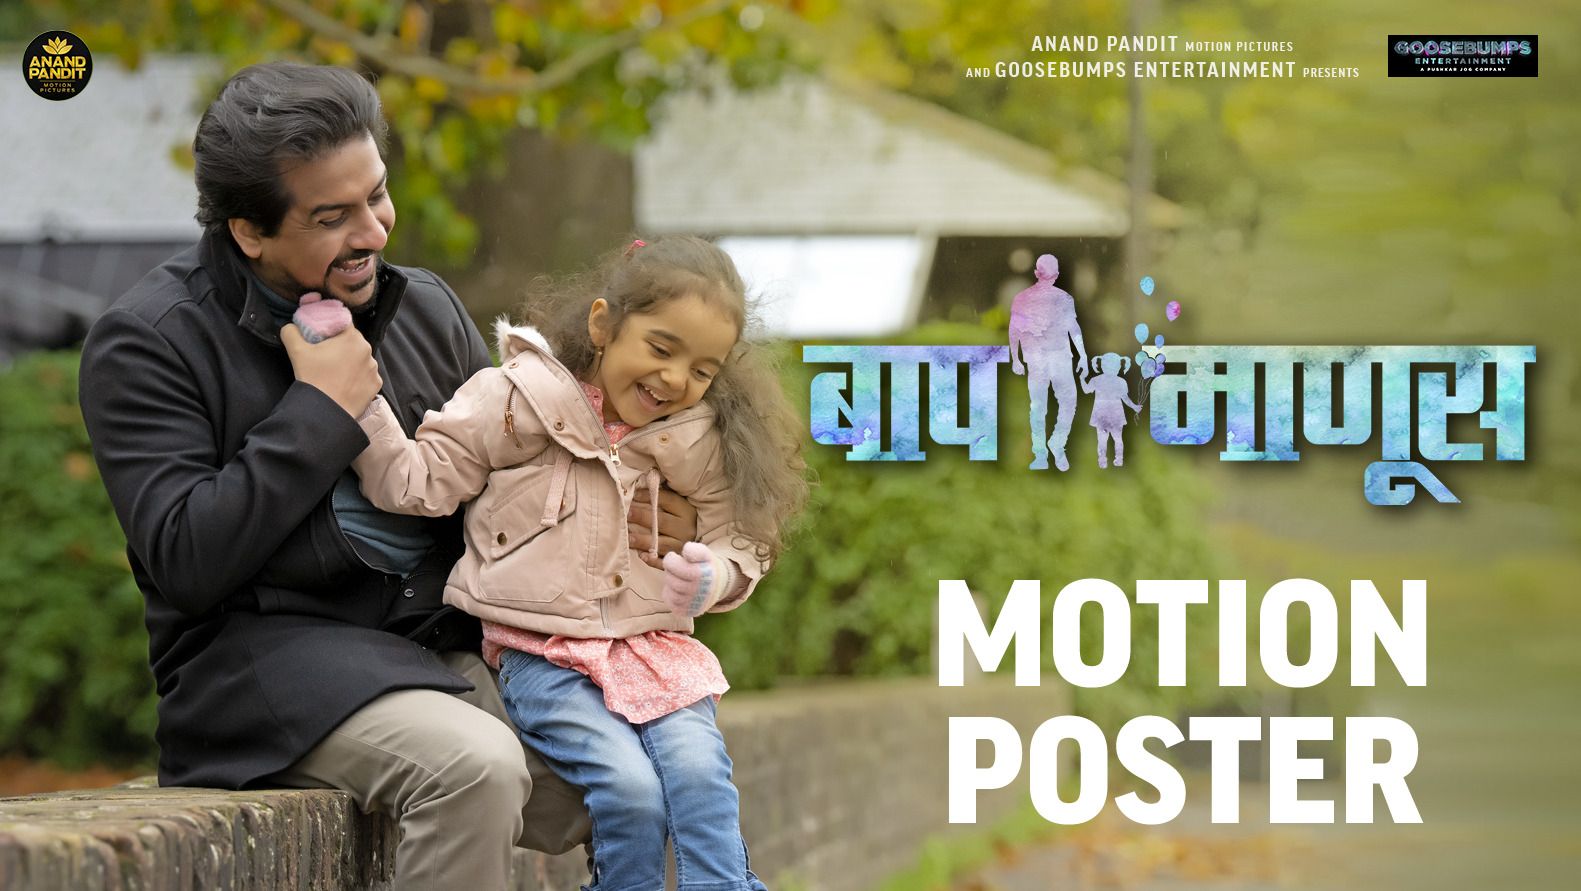 “Baap Manus” drops a motion poster on Father’s Day!